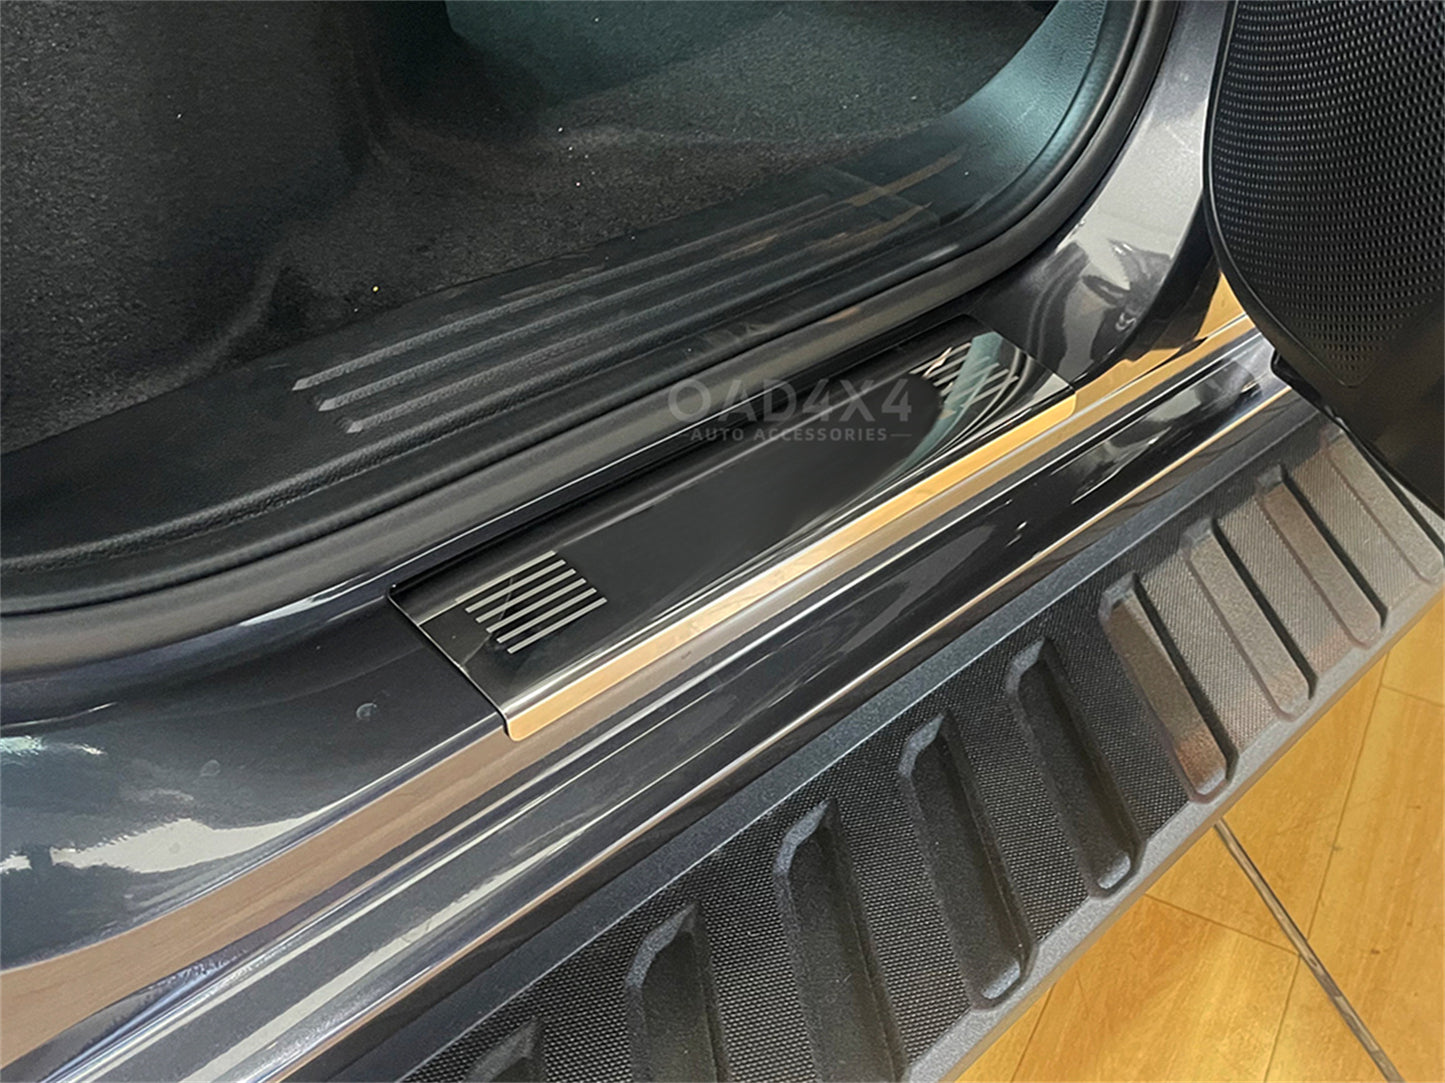 Injection Weather Shields & Stainless Steel Door Sills For Ford Ranger Dual Cab Next-Gen 2022-Onwards Window Visors Weathershields Scuff Plates